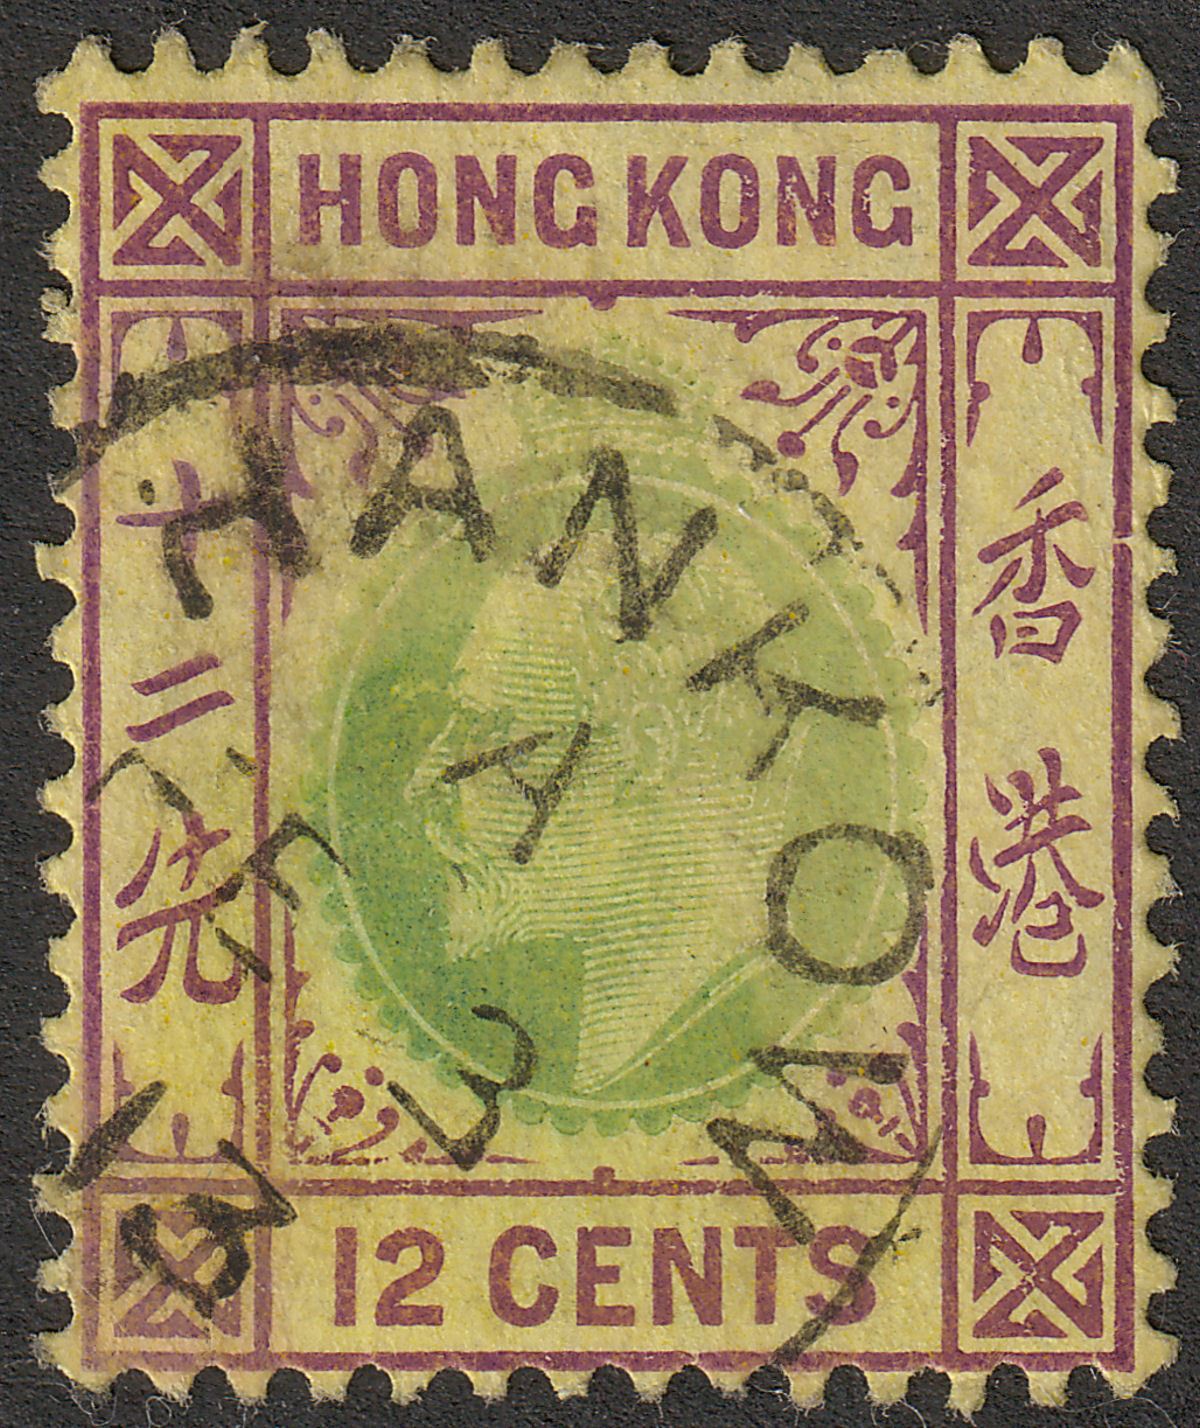 Hong Kong 1913 KEVII 12c Used with HANKOW code A postmark SG Z495 cat £32